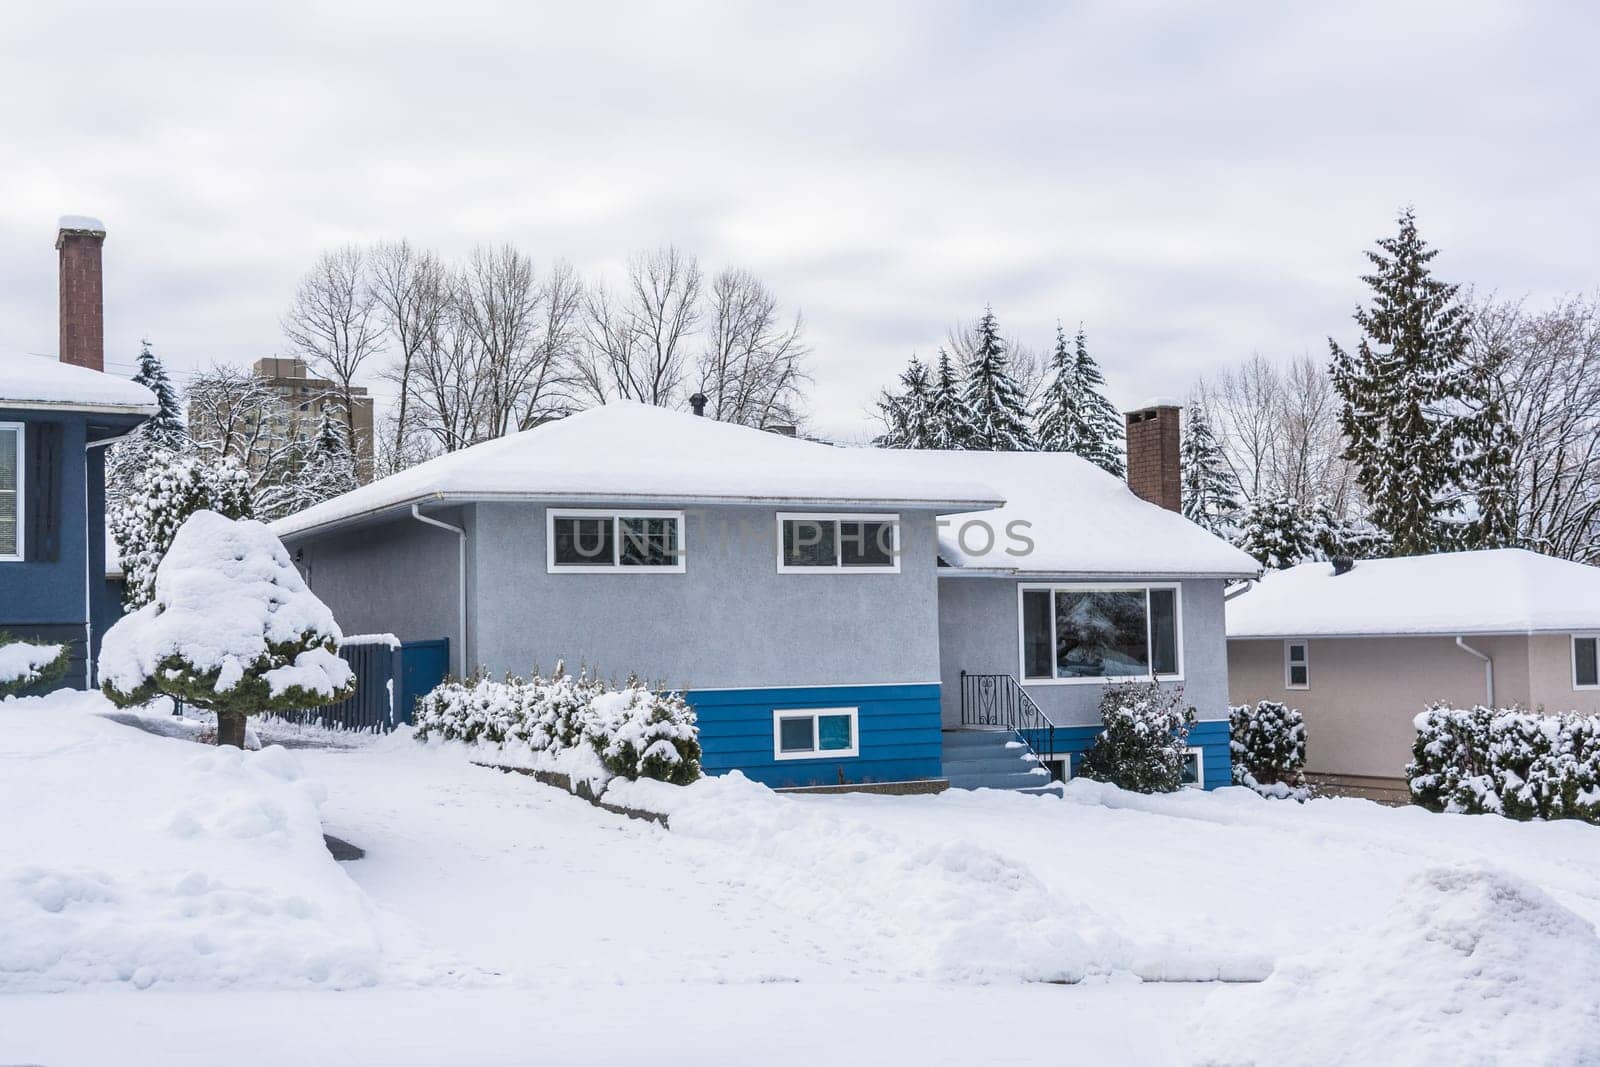 Family residential house with front yard in snow. North American house on winter cloudy day